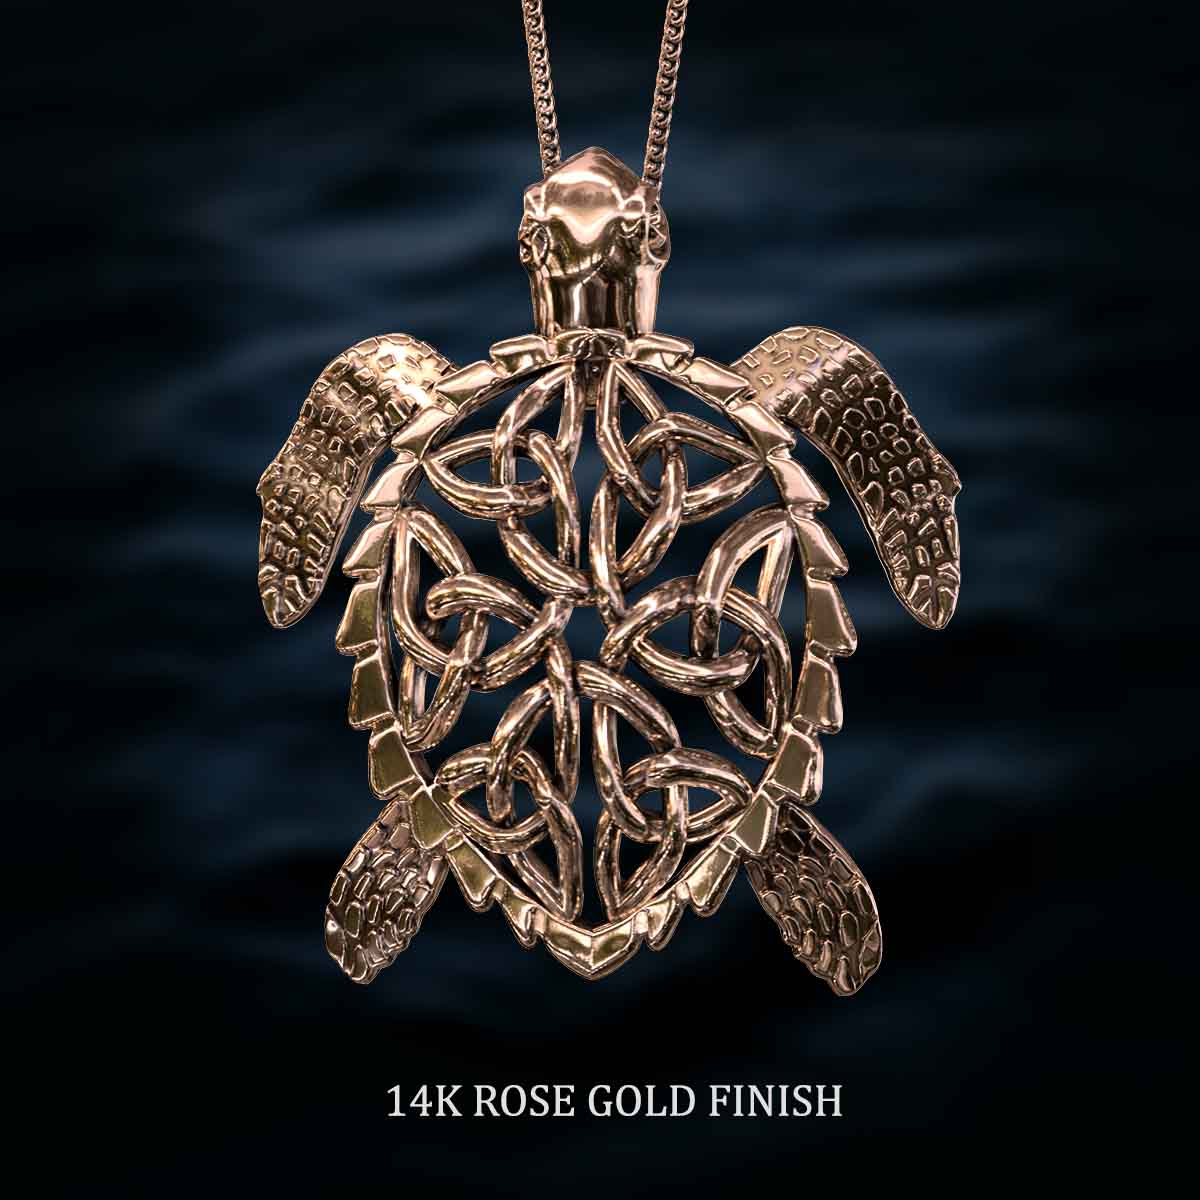     14k-Rose-Gold-Finish-Celtic-Sea-Turtle-Pendant-Jewelry-For-Necklace